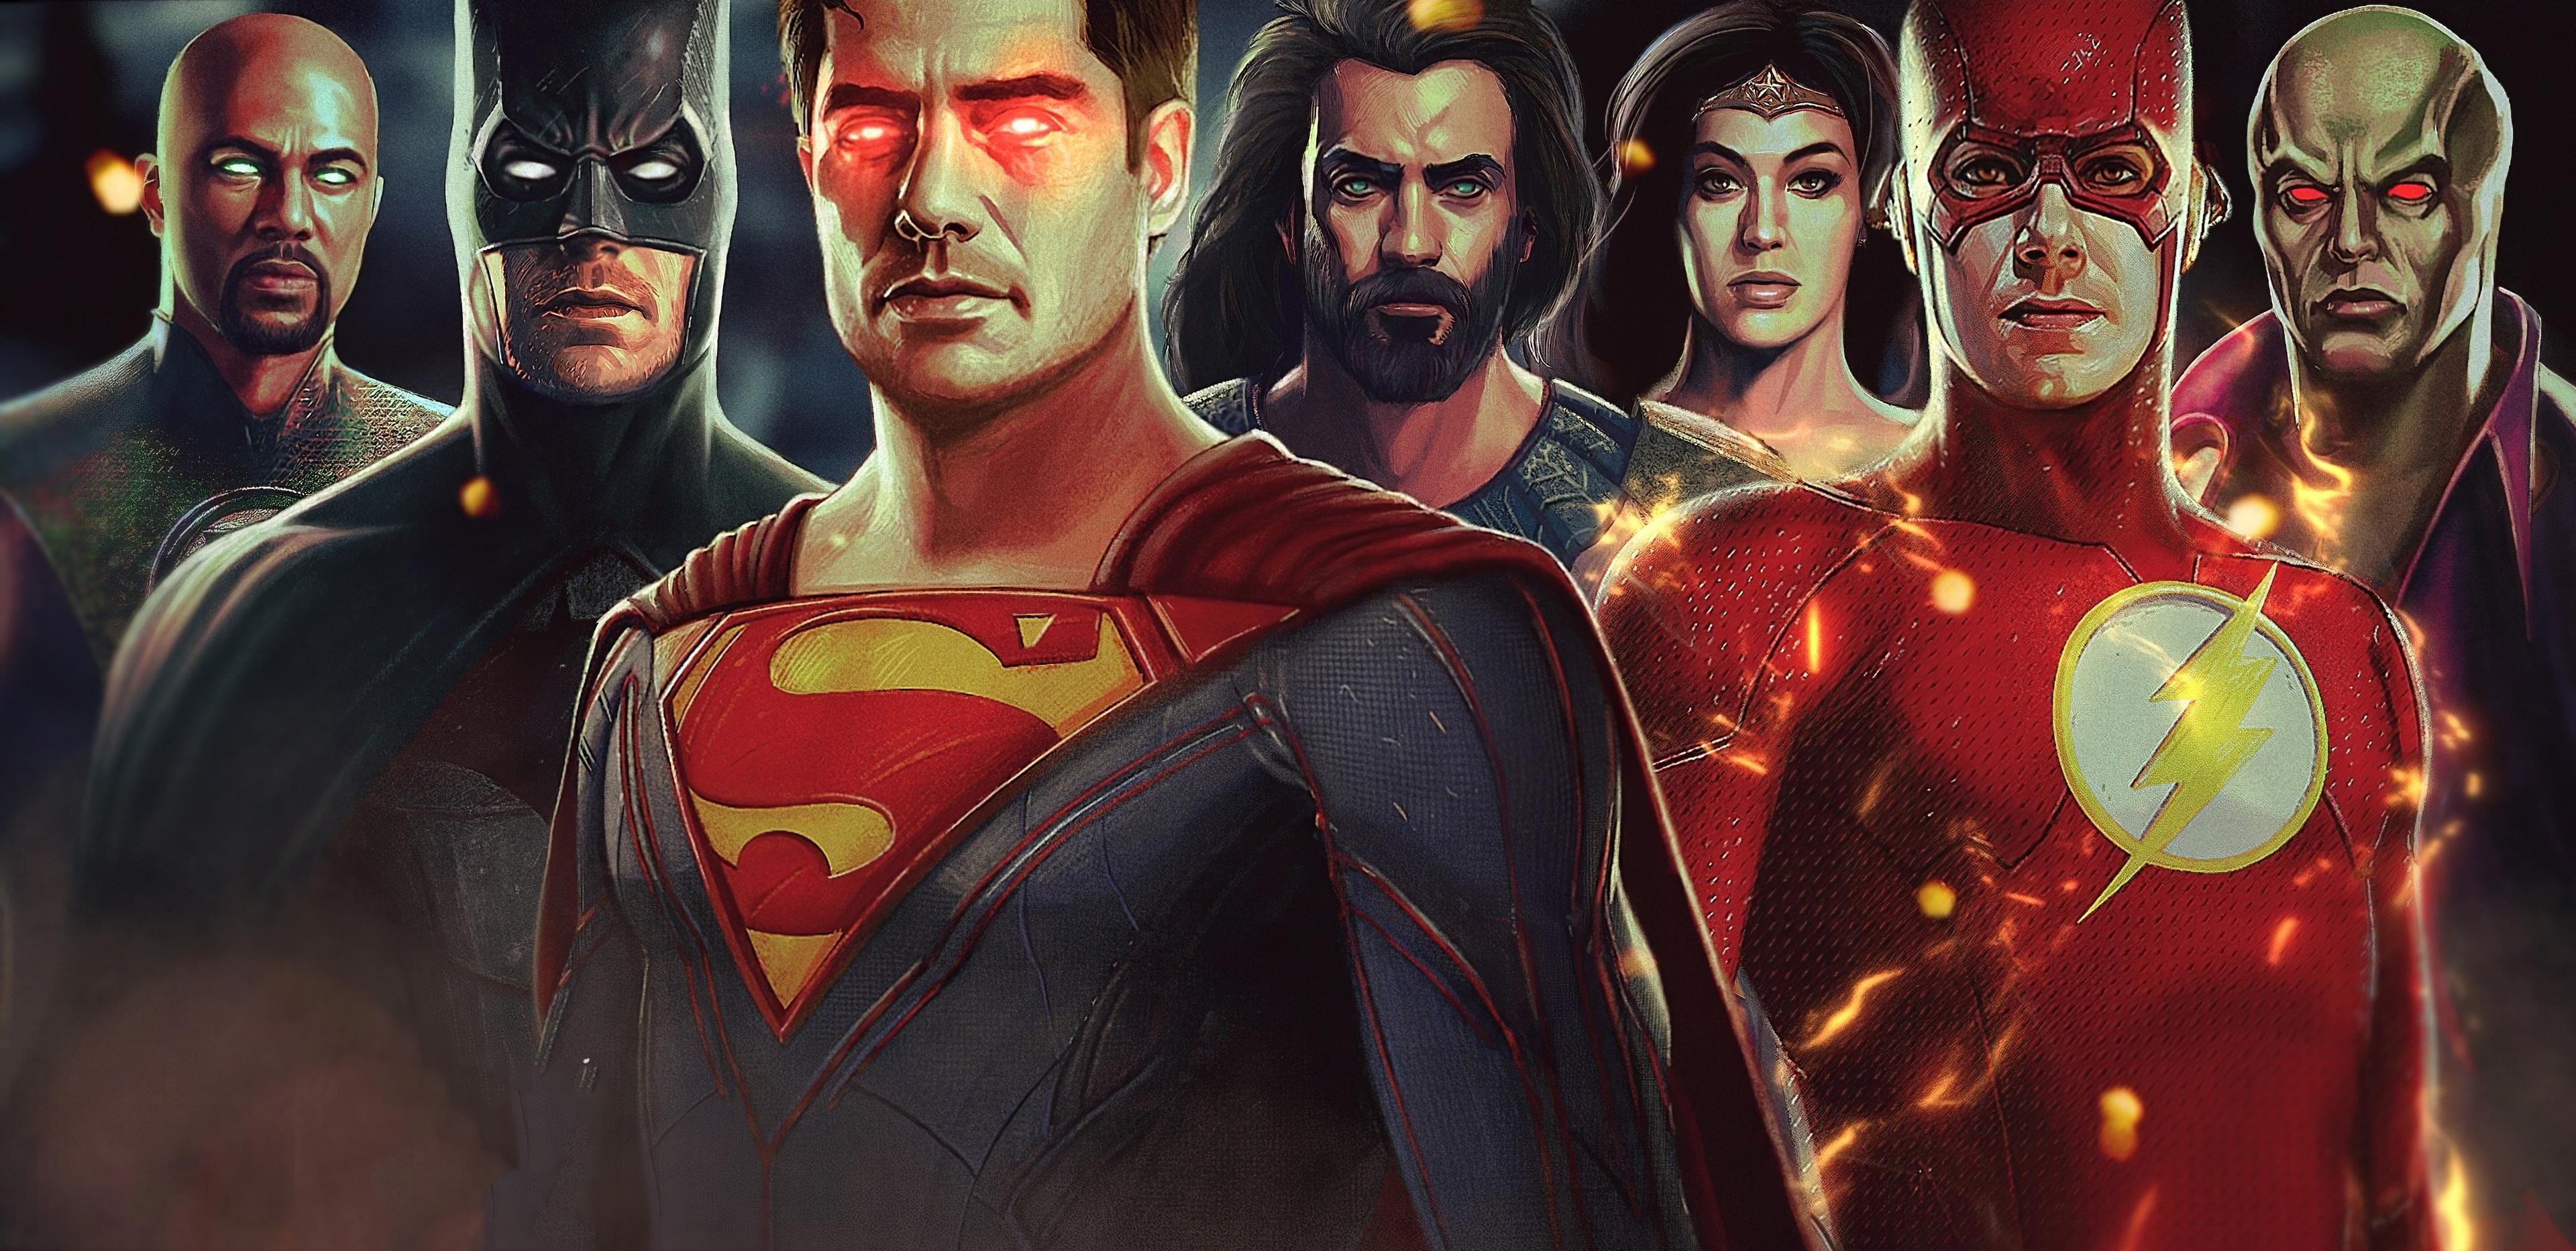 justice league heroes download pc